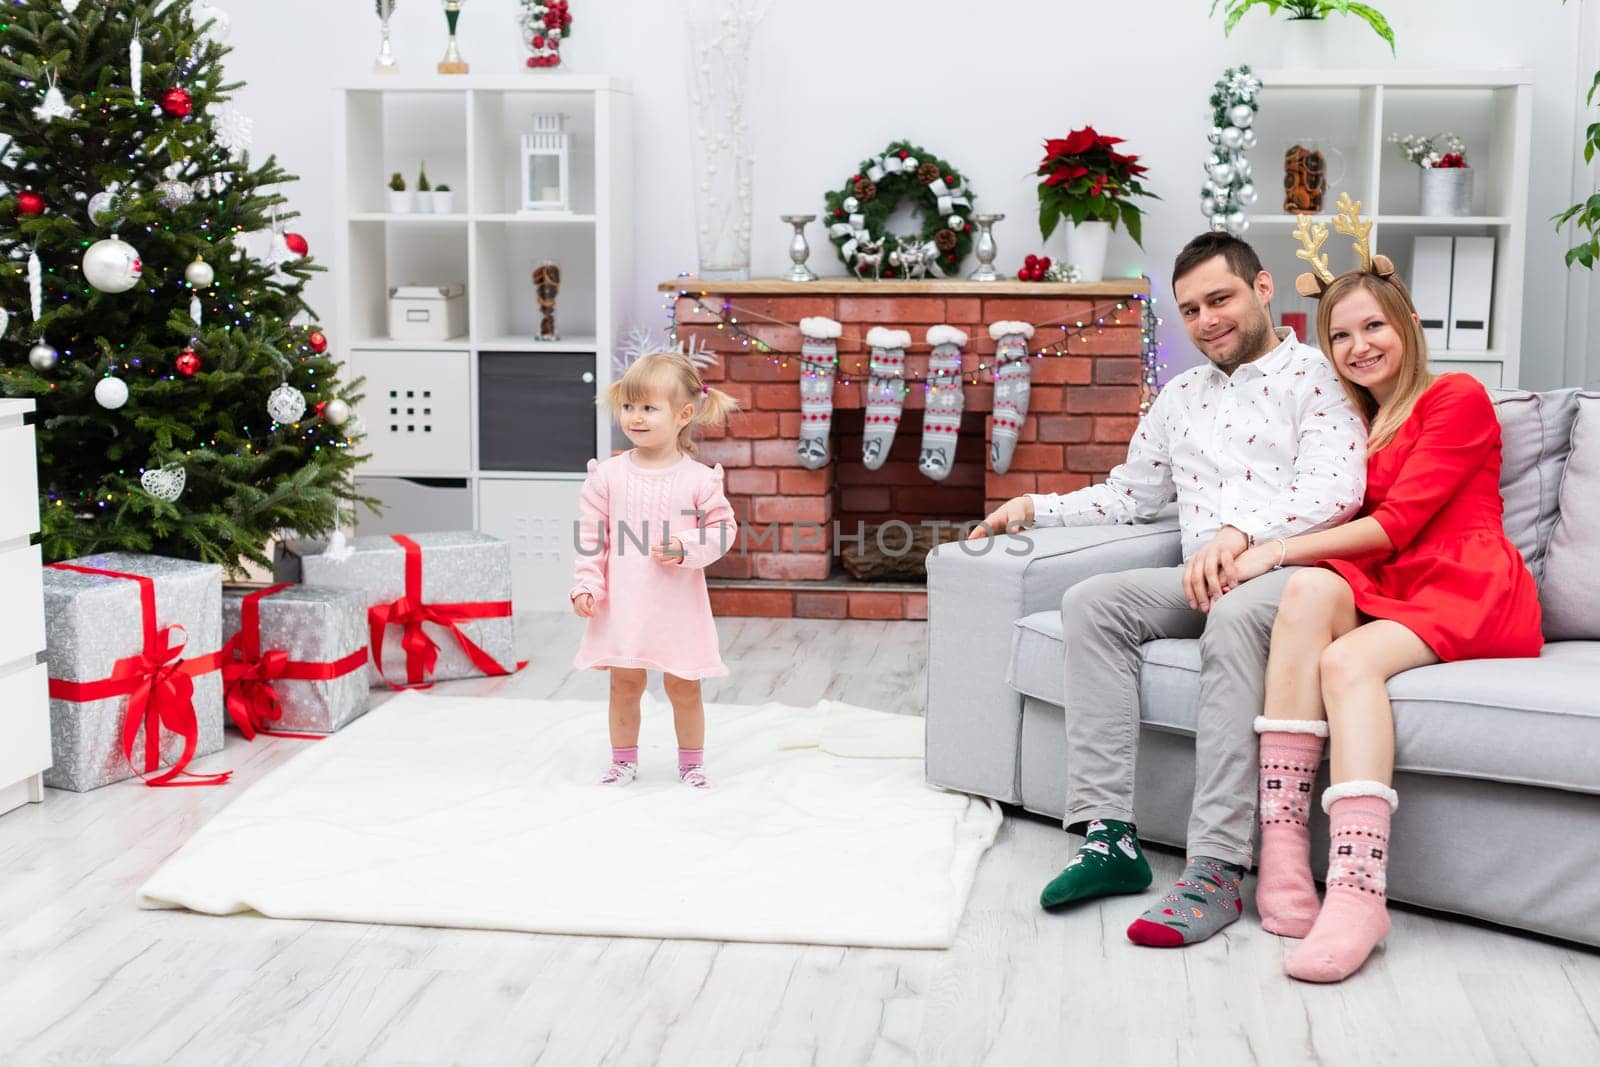 A hugging couple sits on a gray couch, while a little girl stands next to them. The girl stands on a white fluffy carpet. The family of three is staying in a room decorated festively.